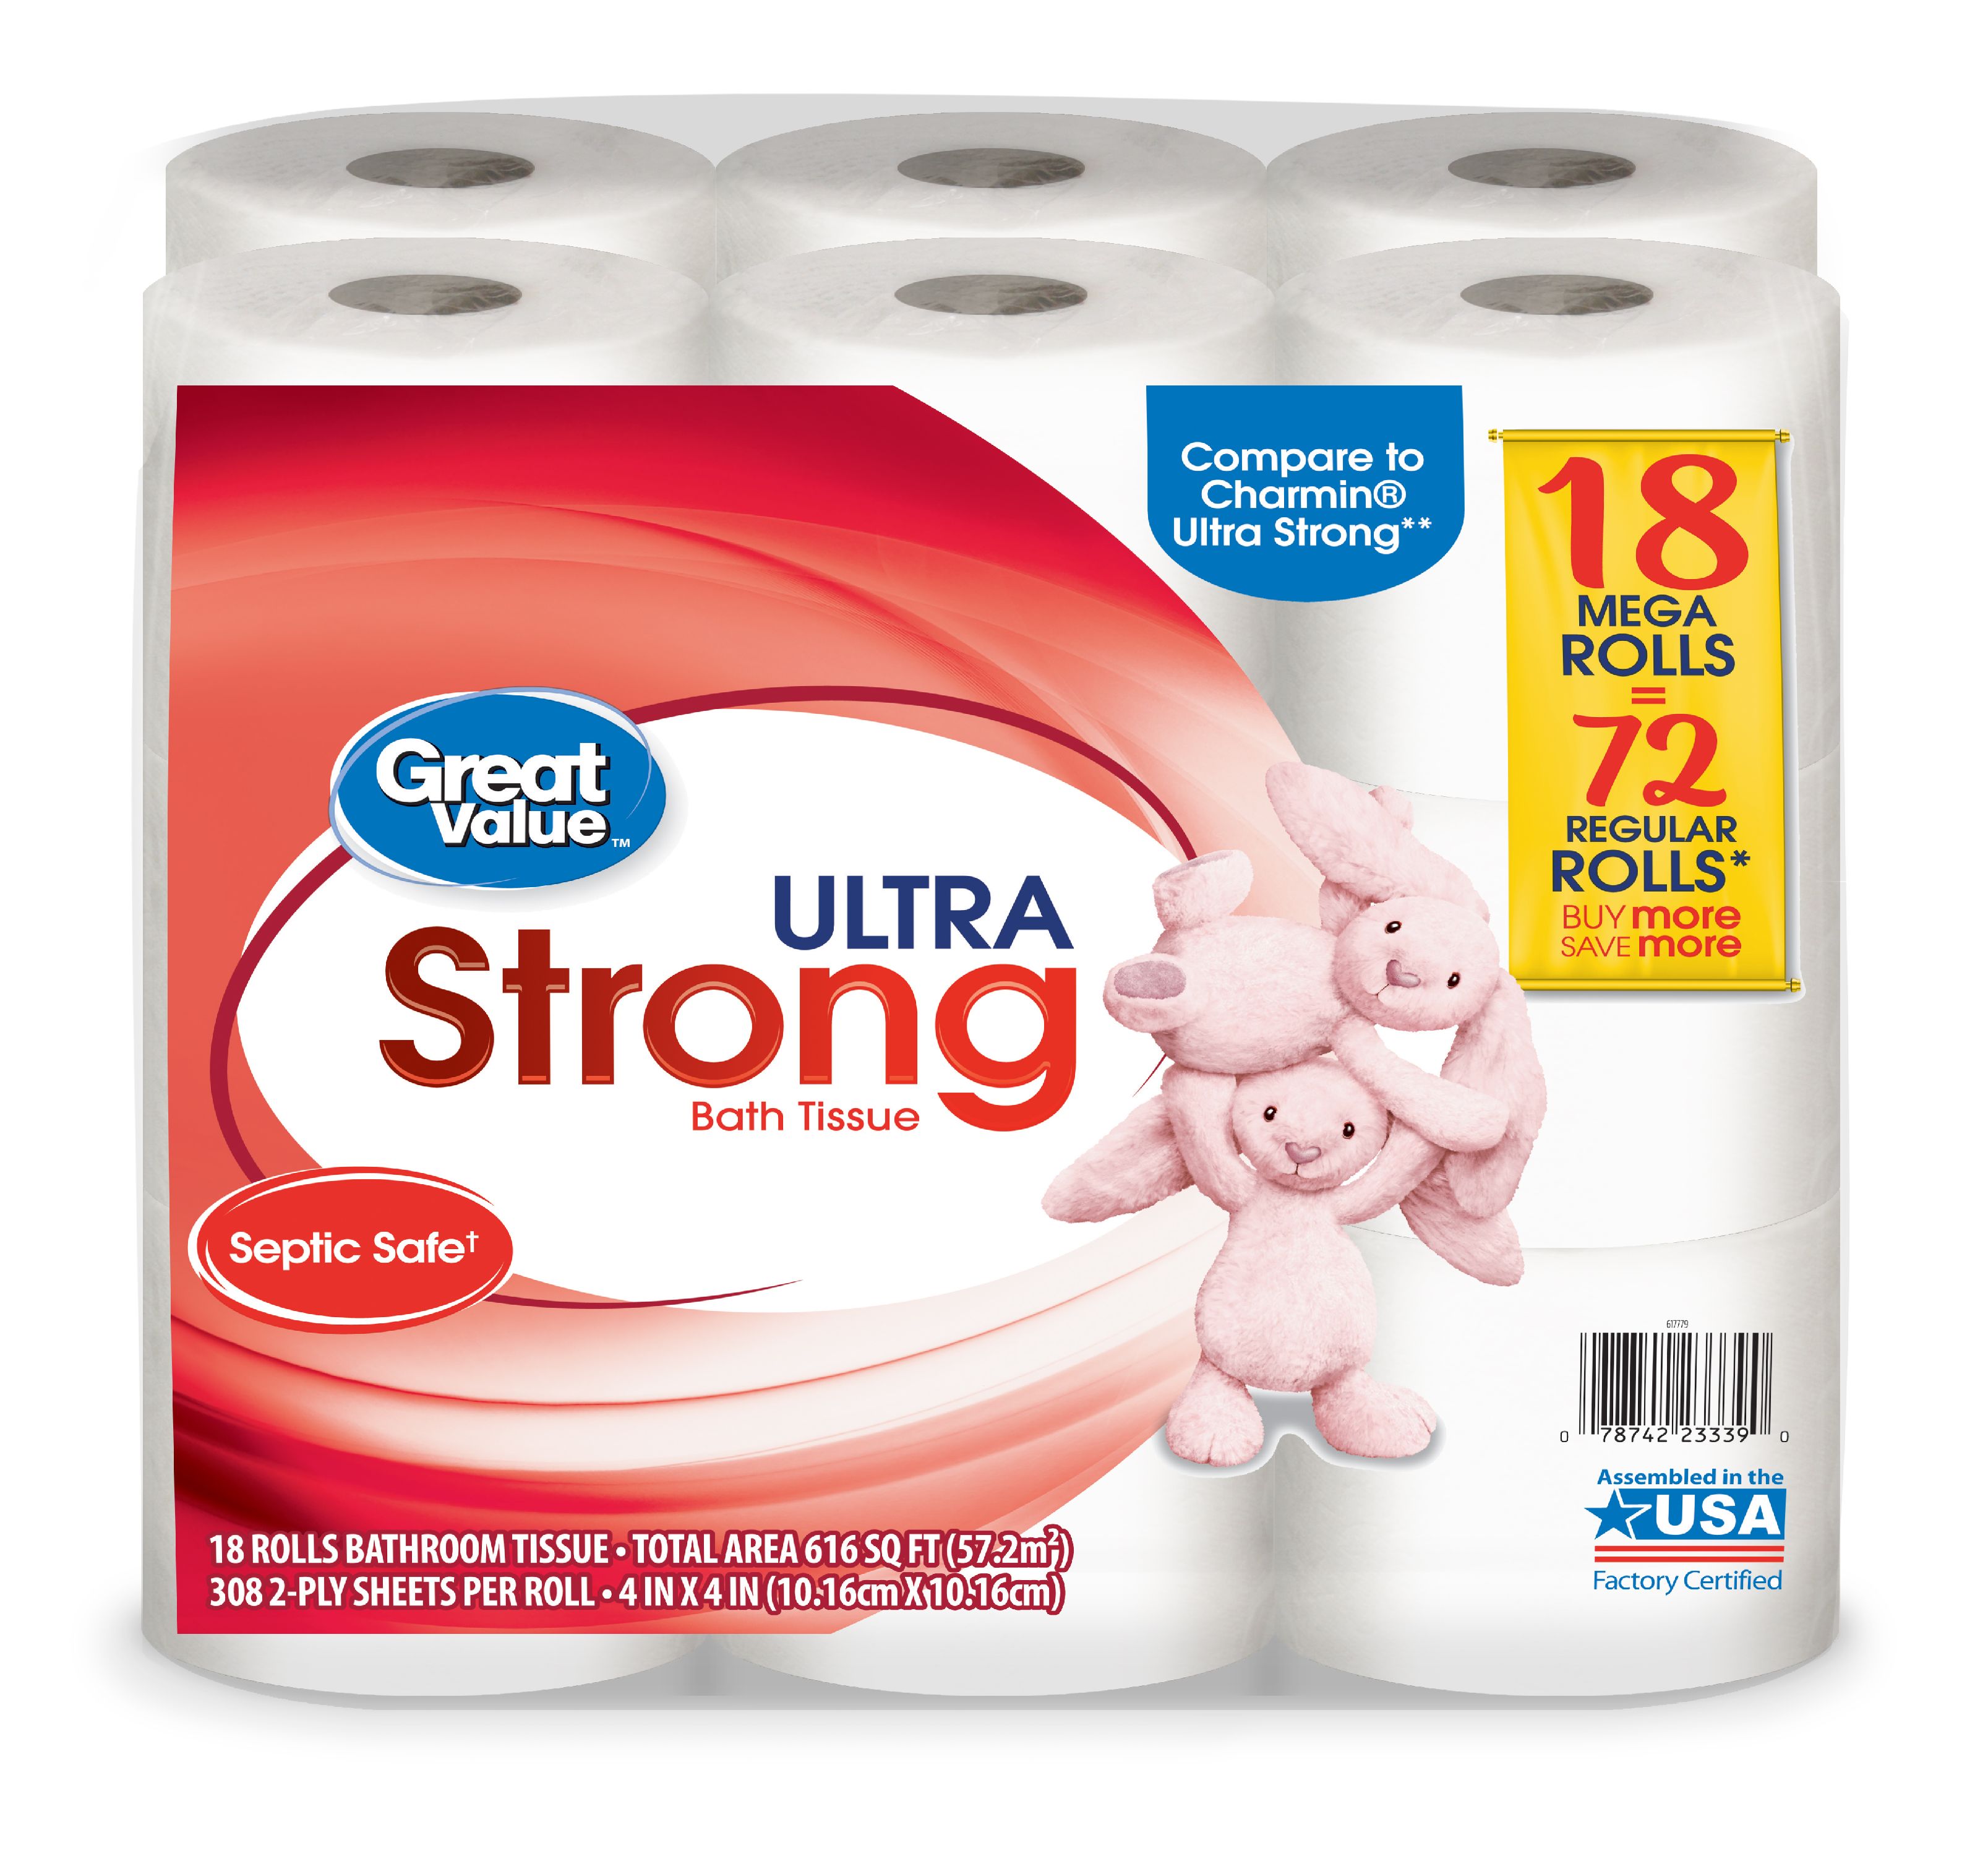 Great Value Ultra Strong Toilet Paper, 18 Mega Rolls - image 1 of 7